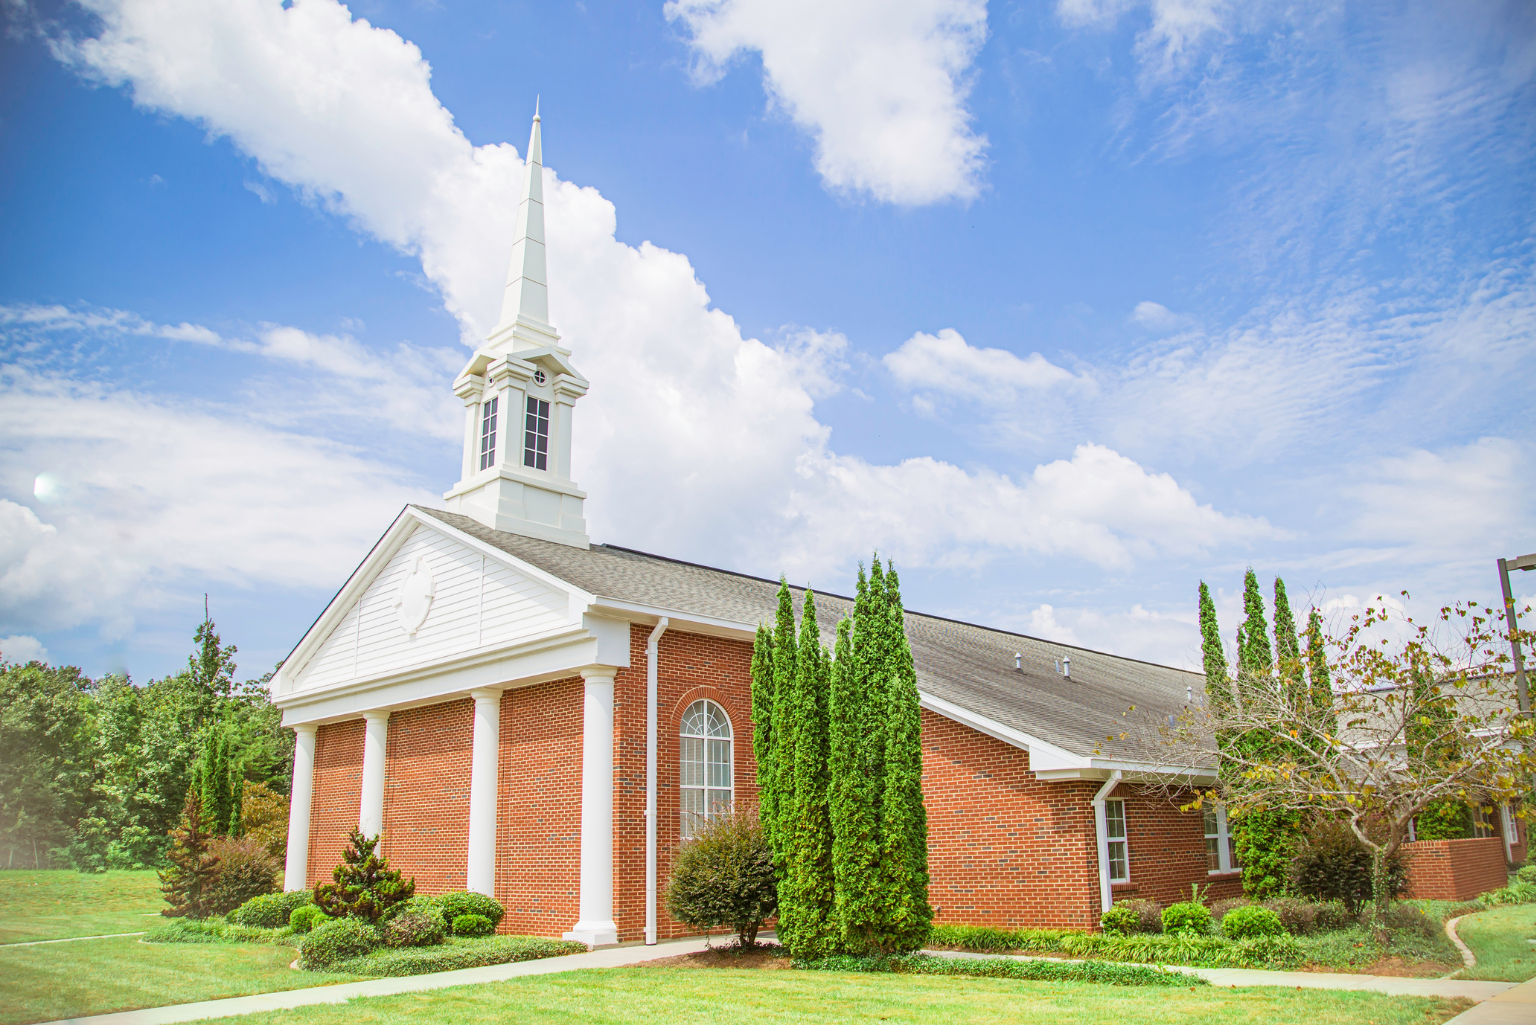 The Lincolnton meetinghouse for The Church of Jesus Christ of Latter-day Saints located at 105 Old Tram Street, Lincolnton, NC  28092